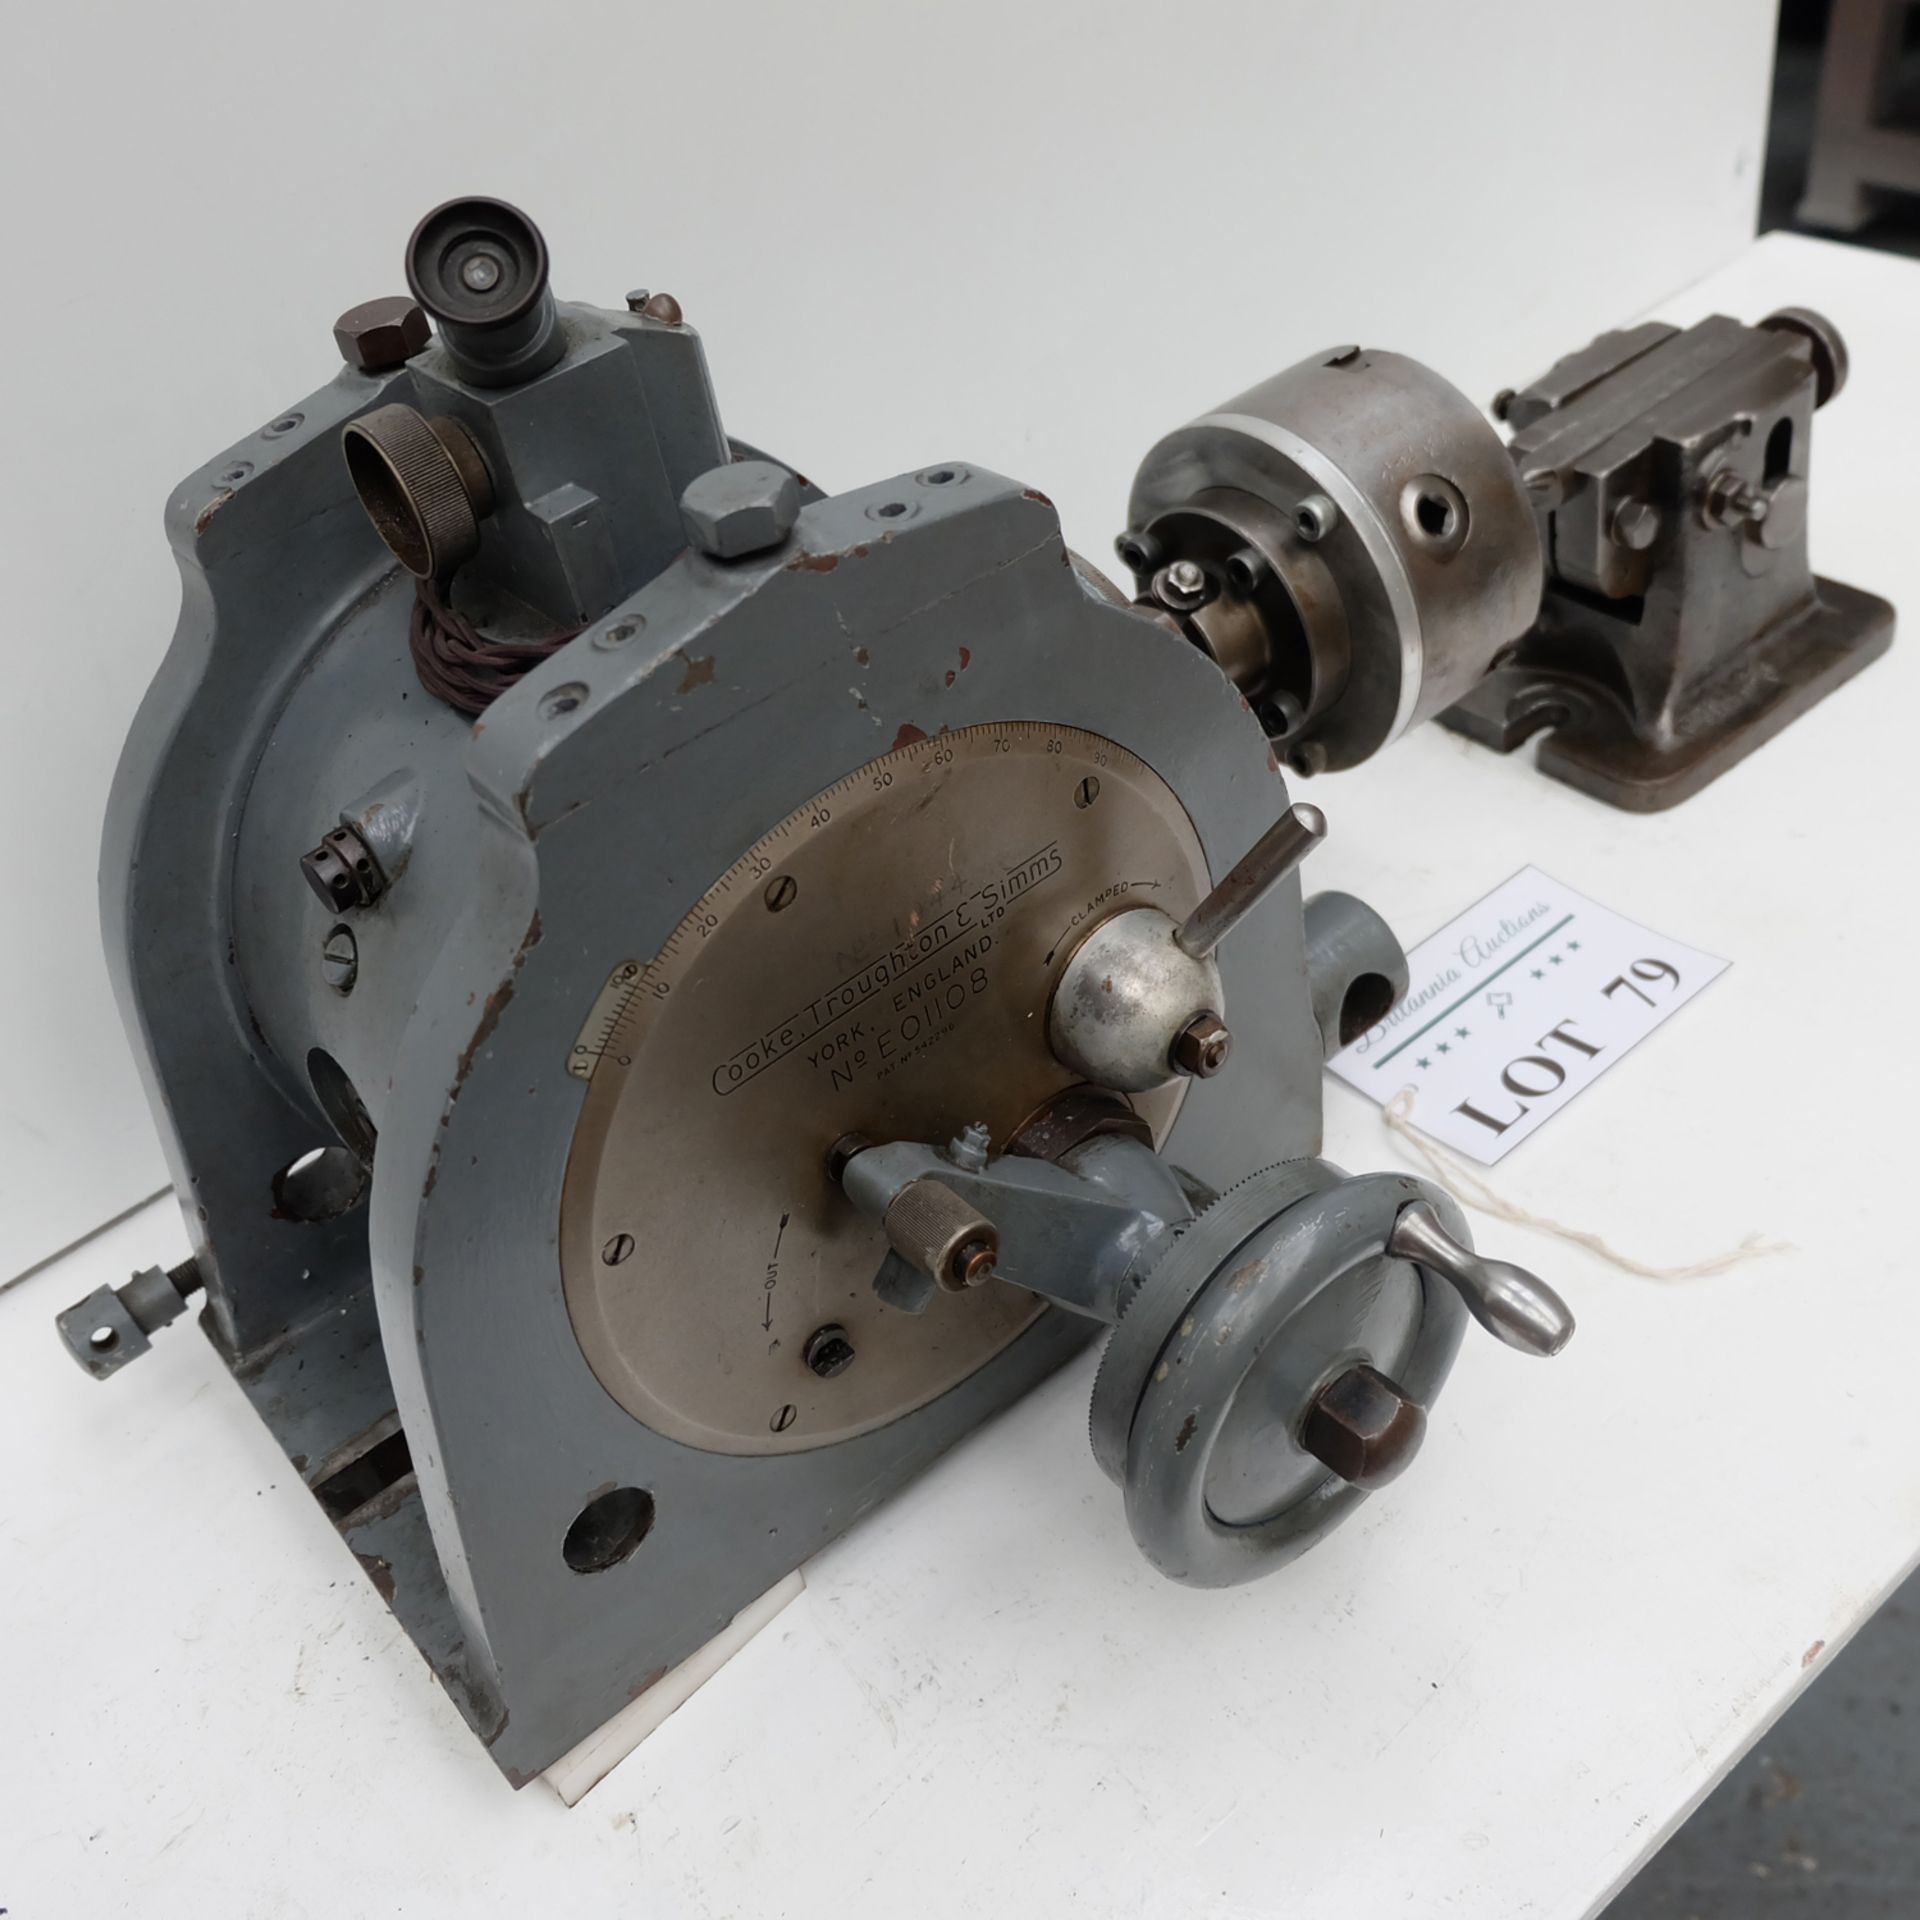 Cook Roughton. Smith 10" Tilting Optical Dividing Head. With 5" 3 Jaw Chuck and Tail Stock. - Image 3 of 10